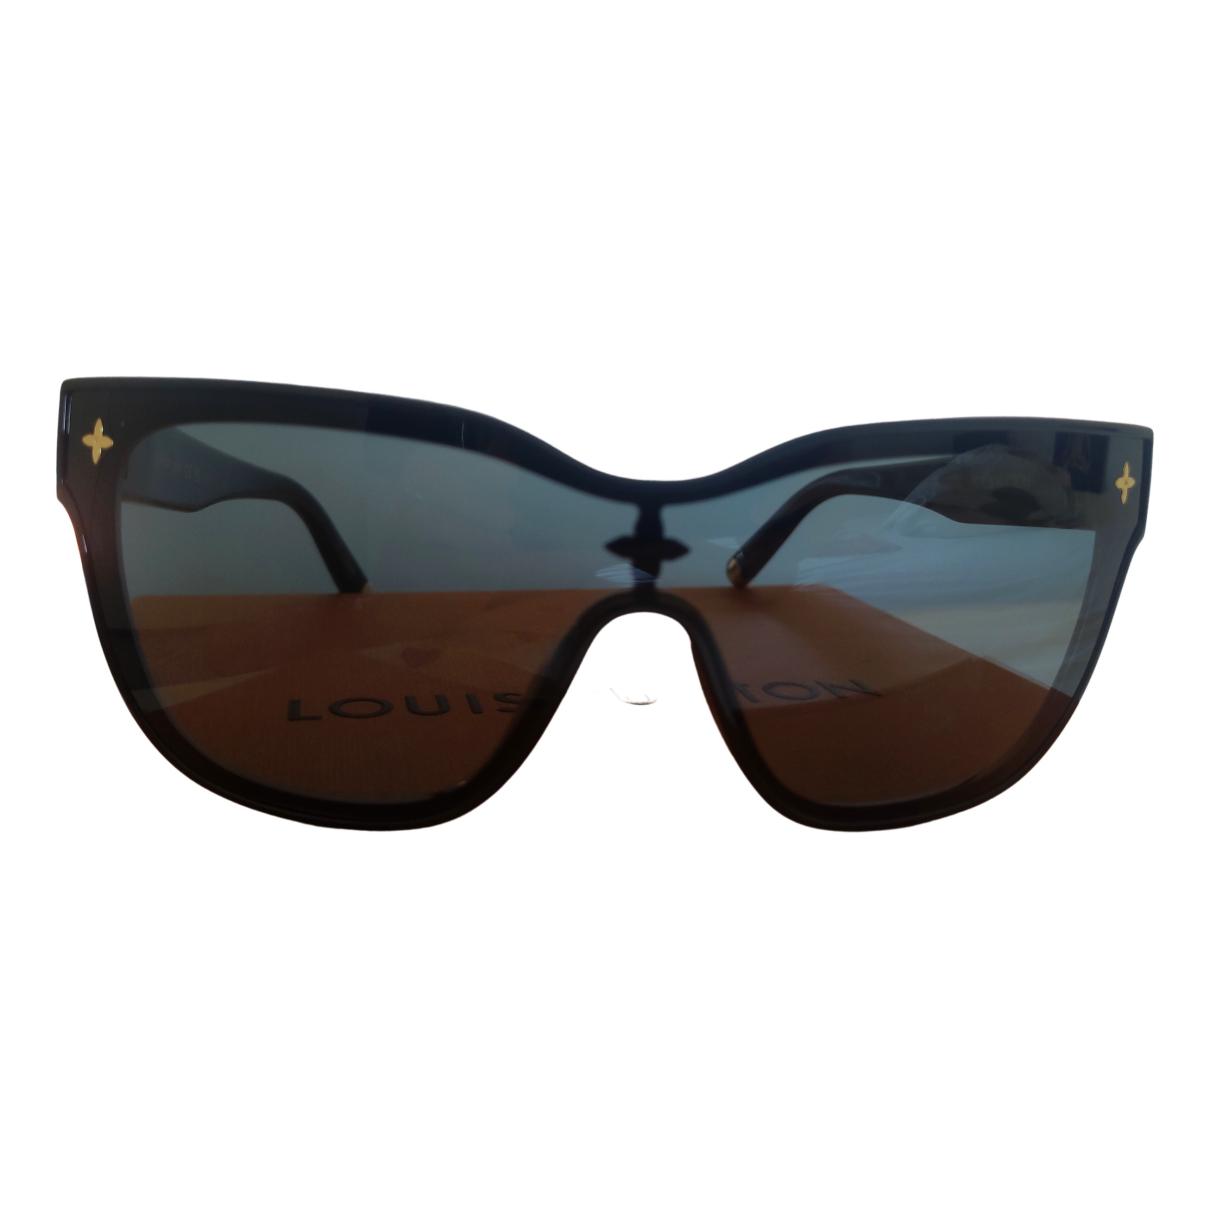 Louis Vuitton Sunglasses  Buy or Sell your LV Sunglasses online! -  Vestiaire Collective